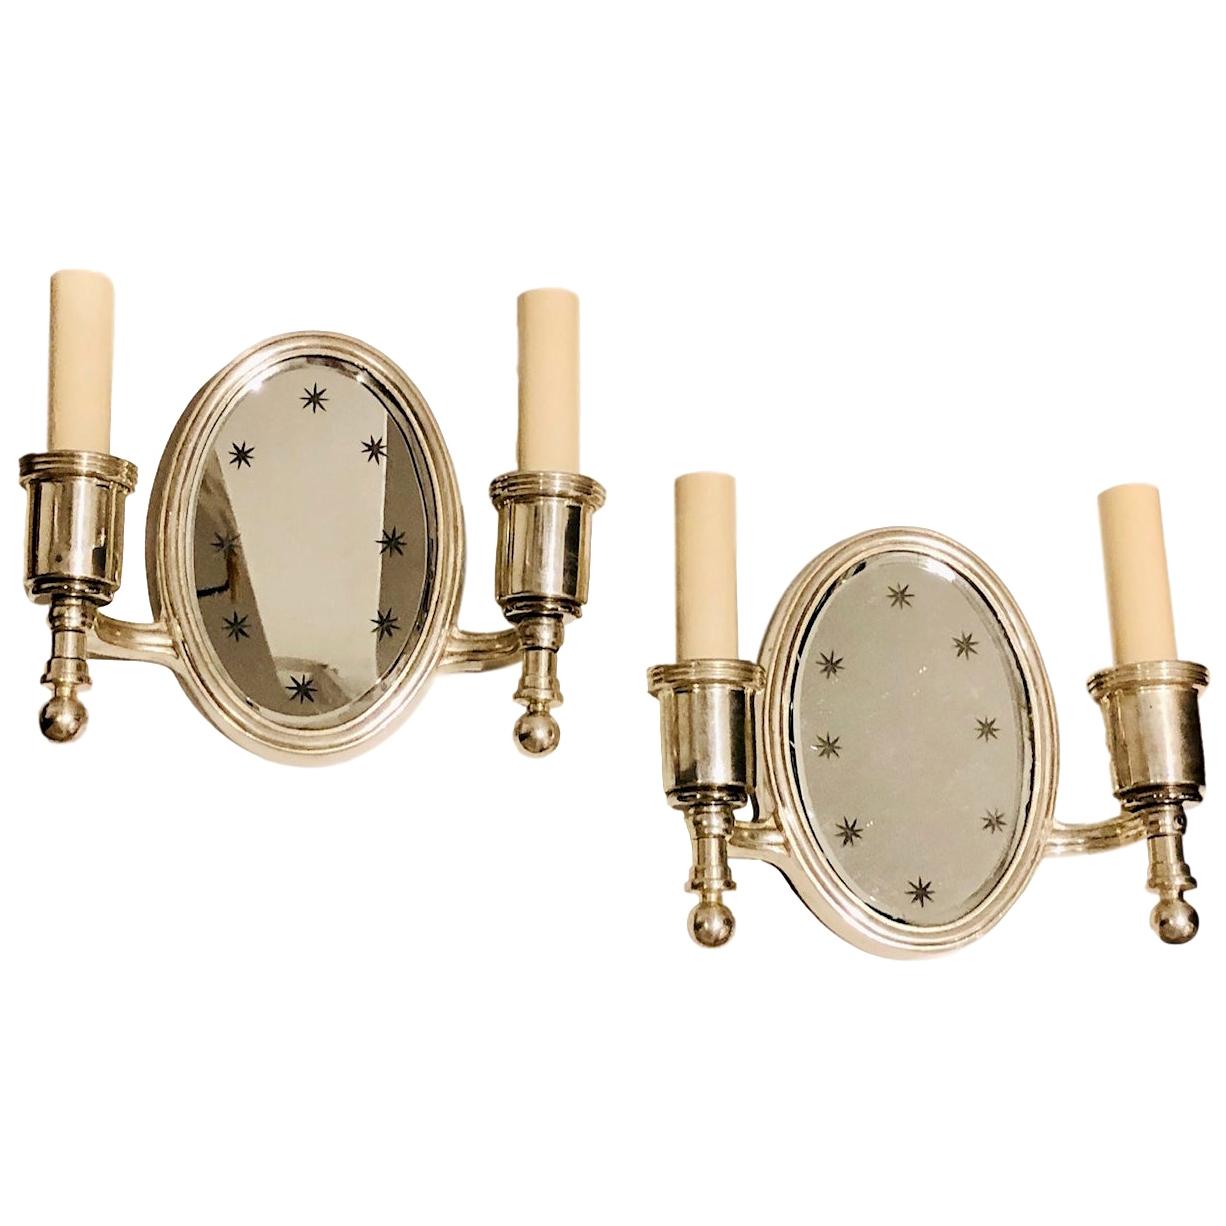 Pair of Silver-Plated Mirror Sconces